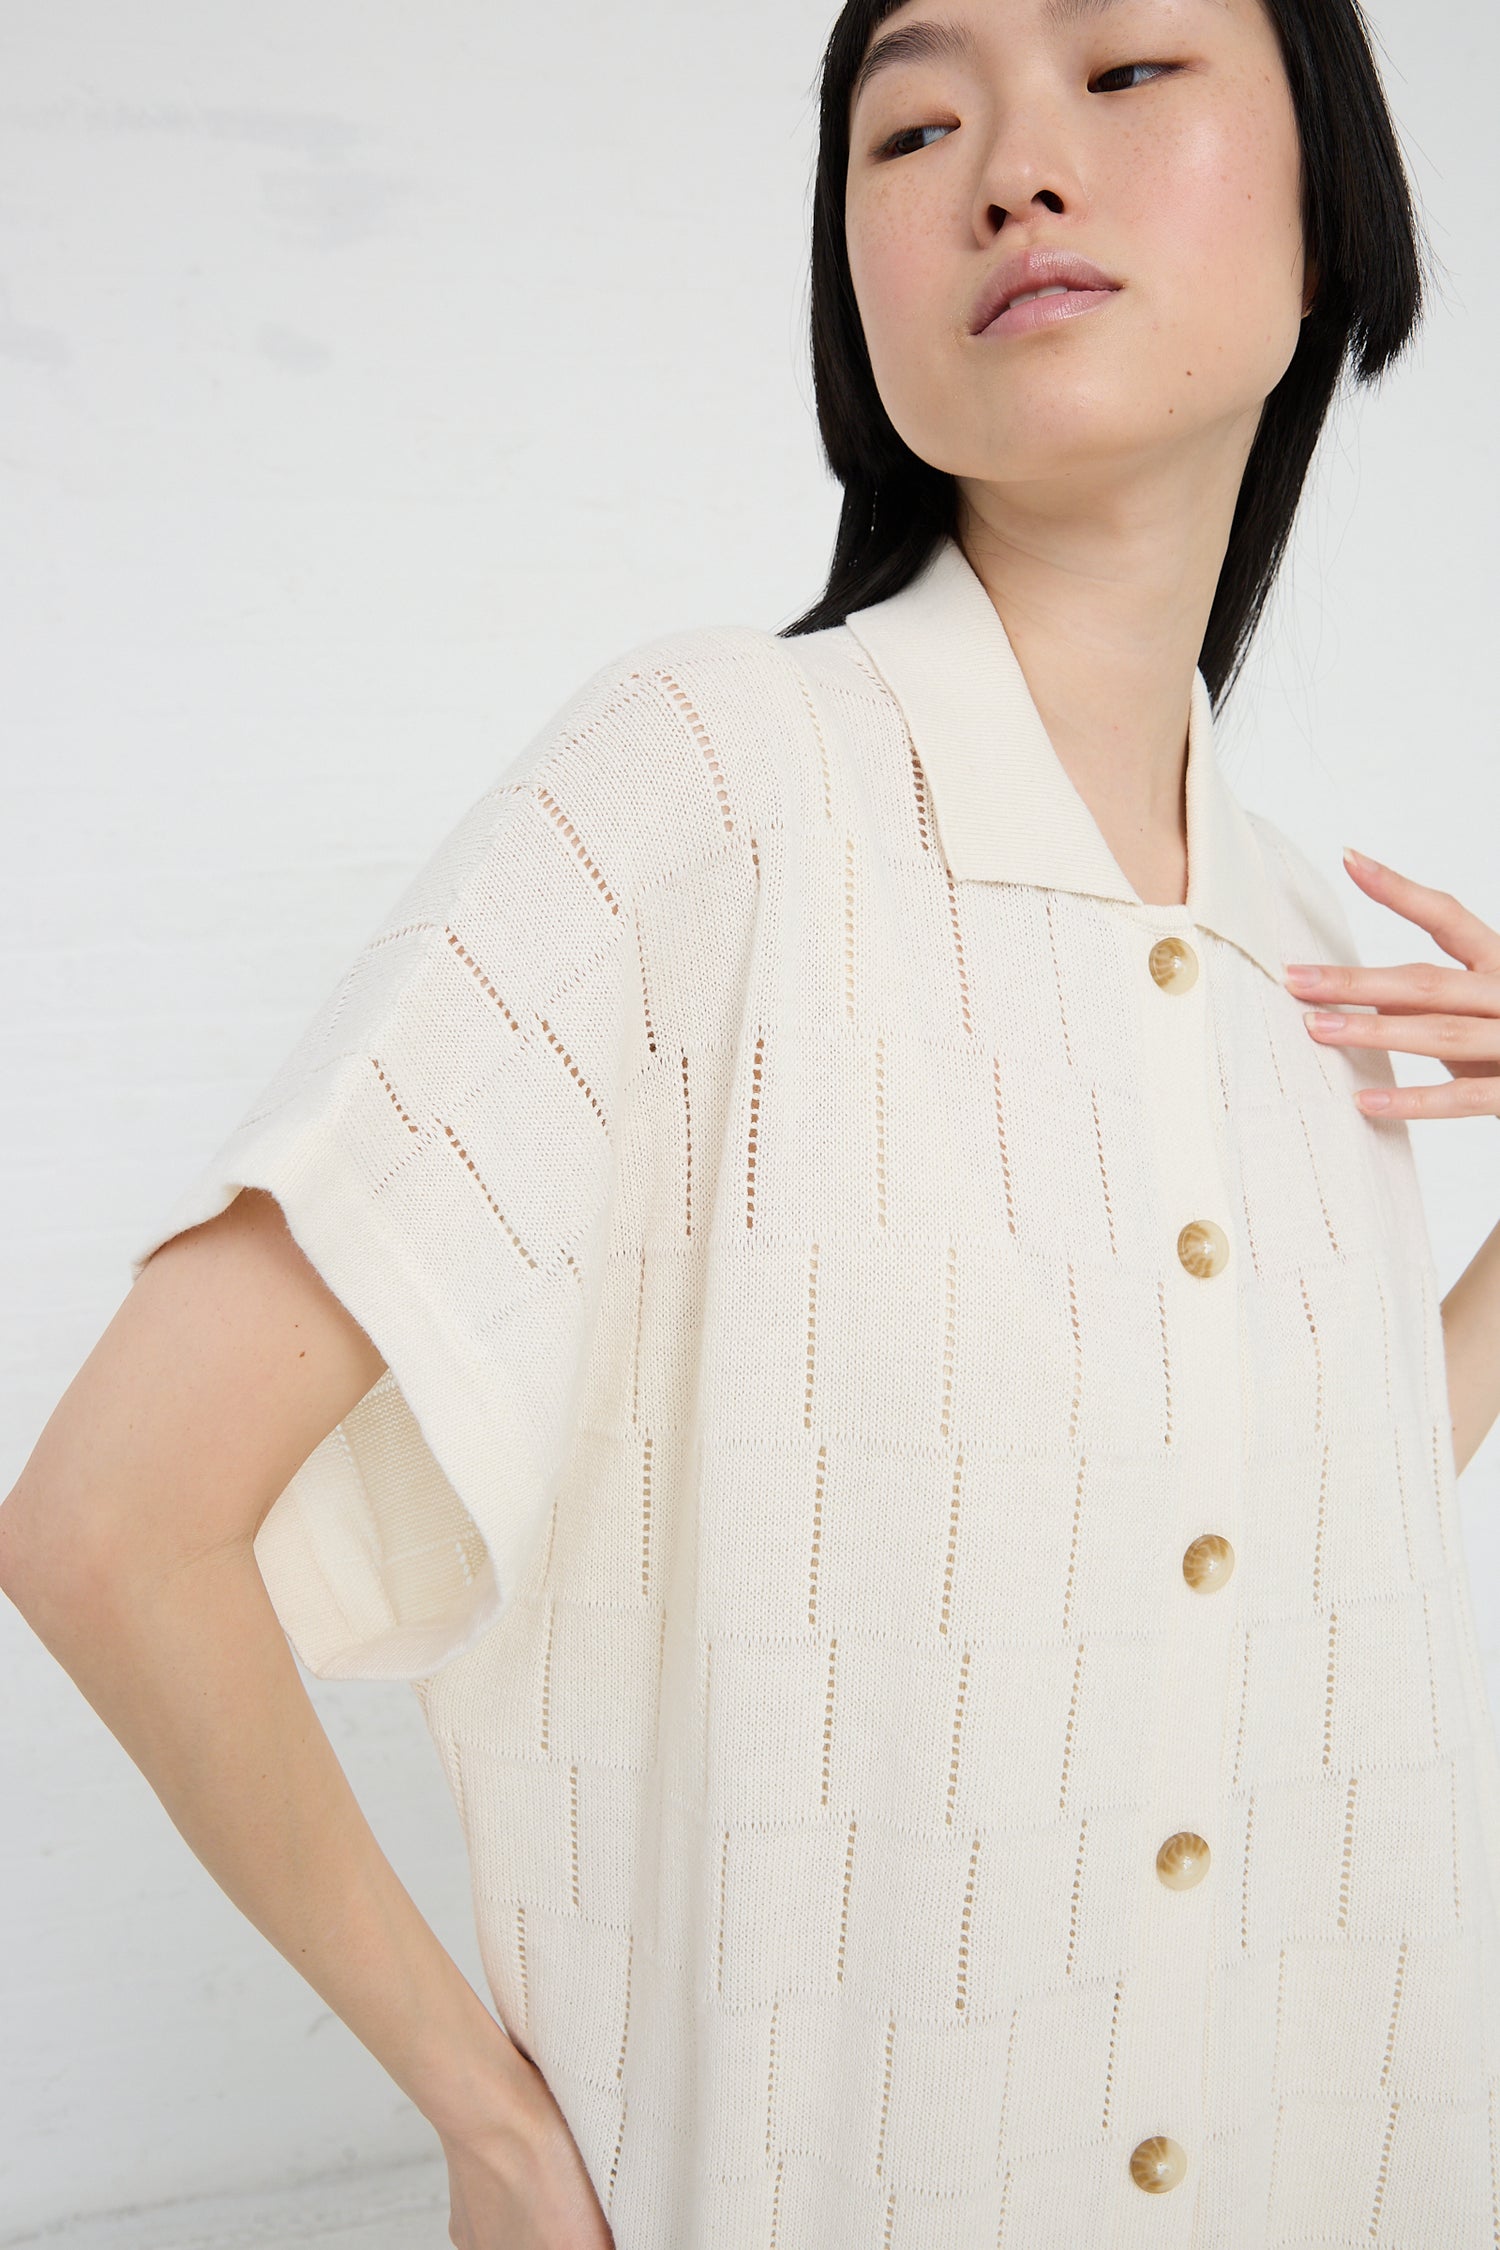 Woman posing in a Lattice Shirt Dress in Bone by Lauren Manoogian, made of cream textured linen blend fabric with button details.